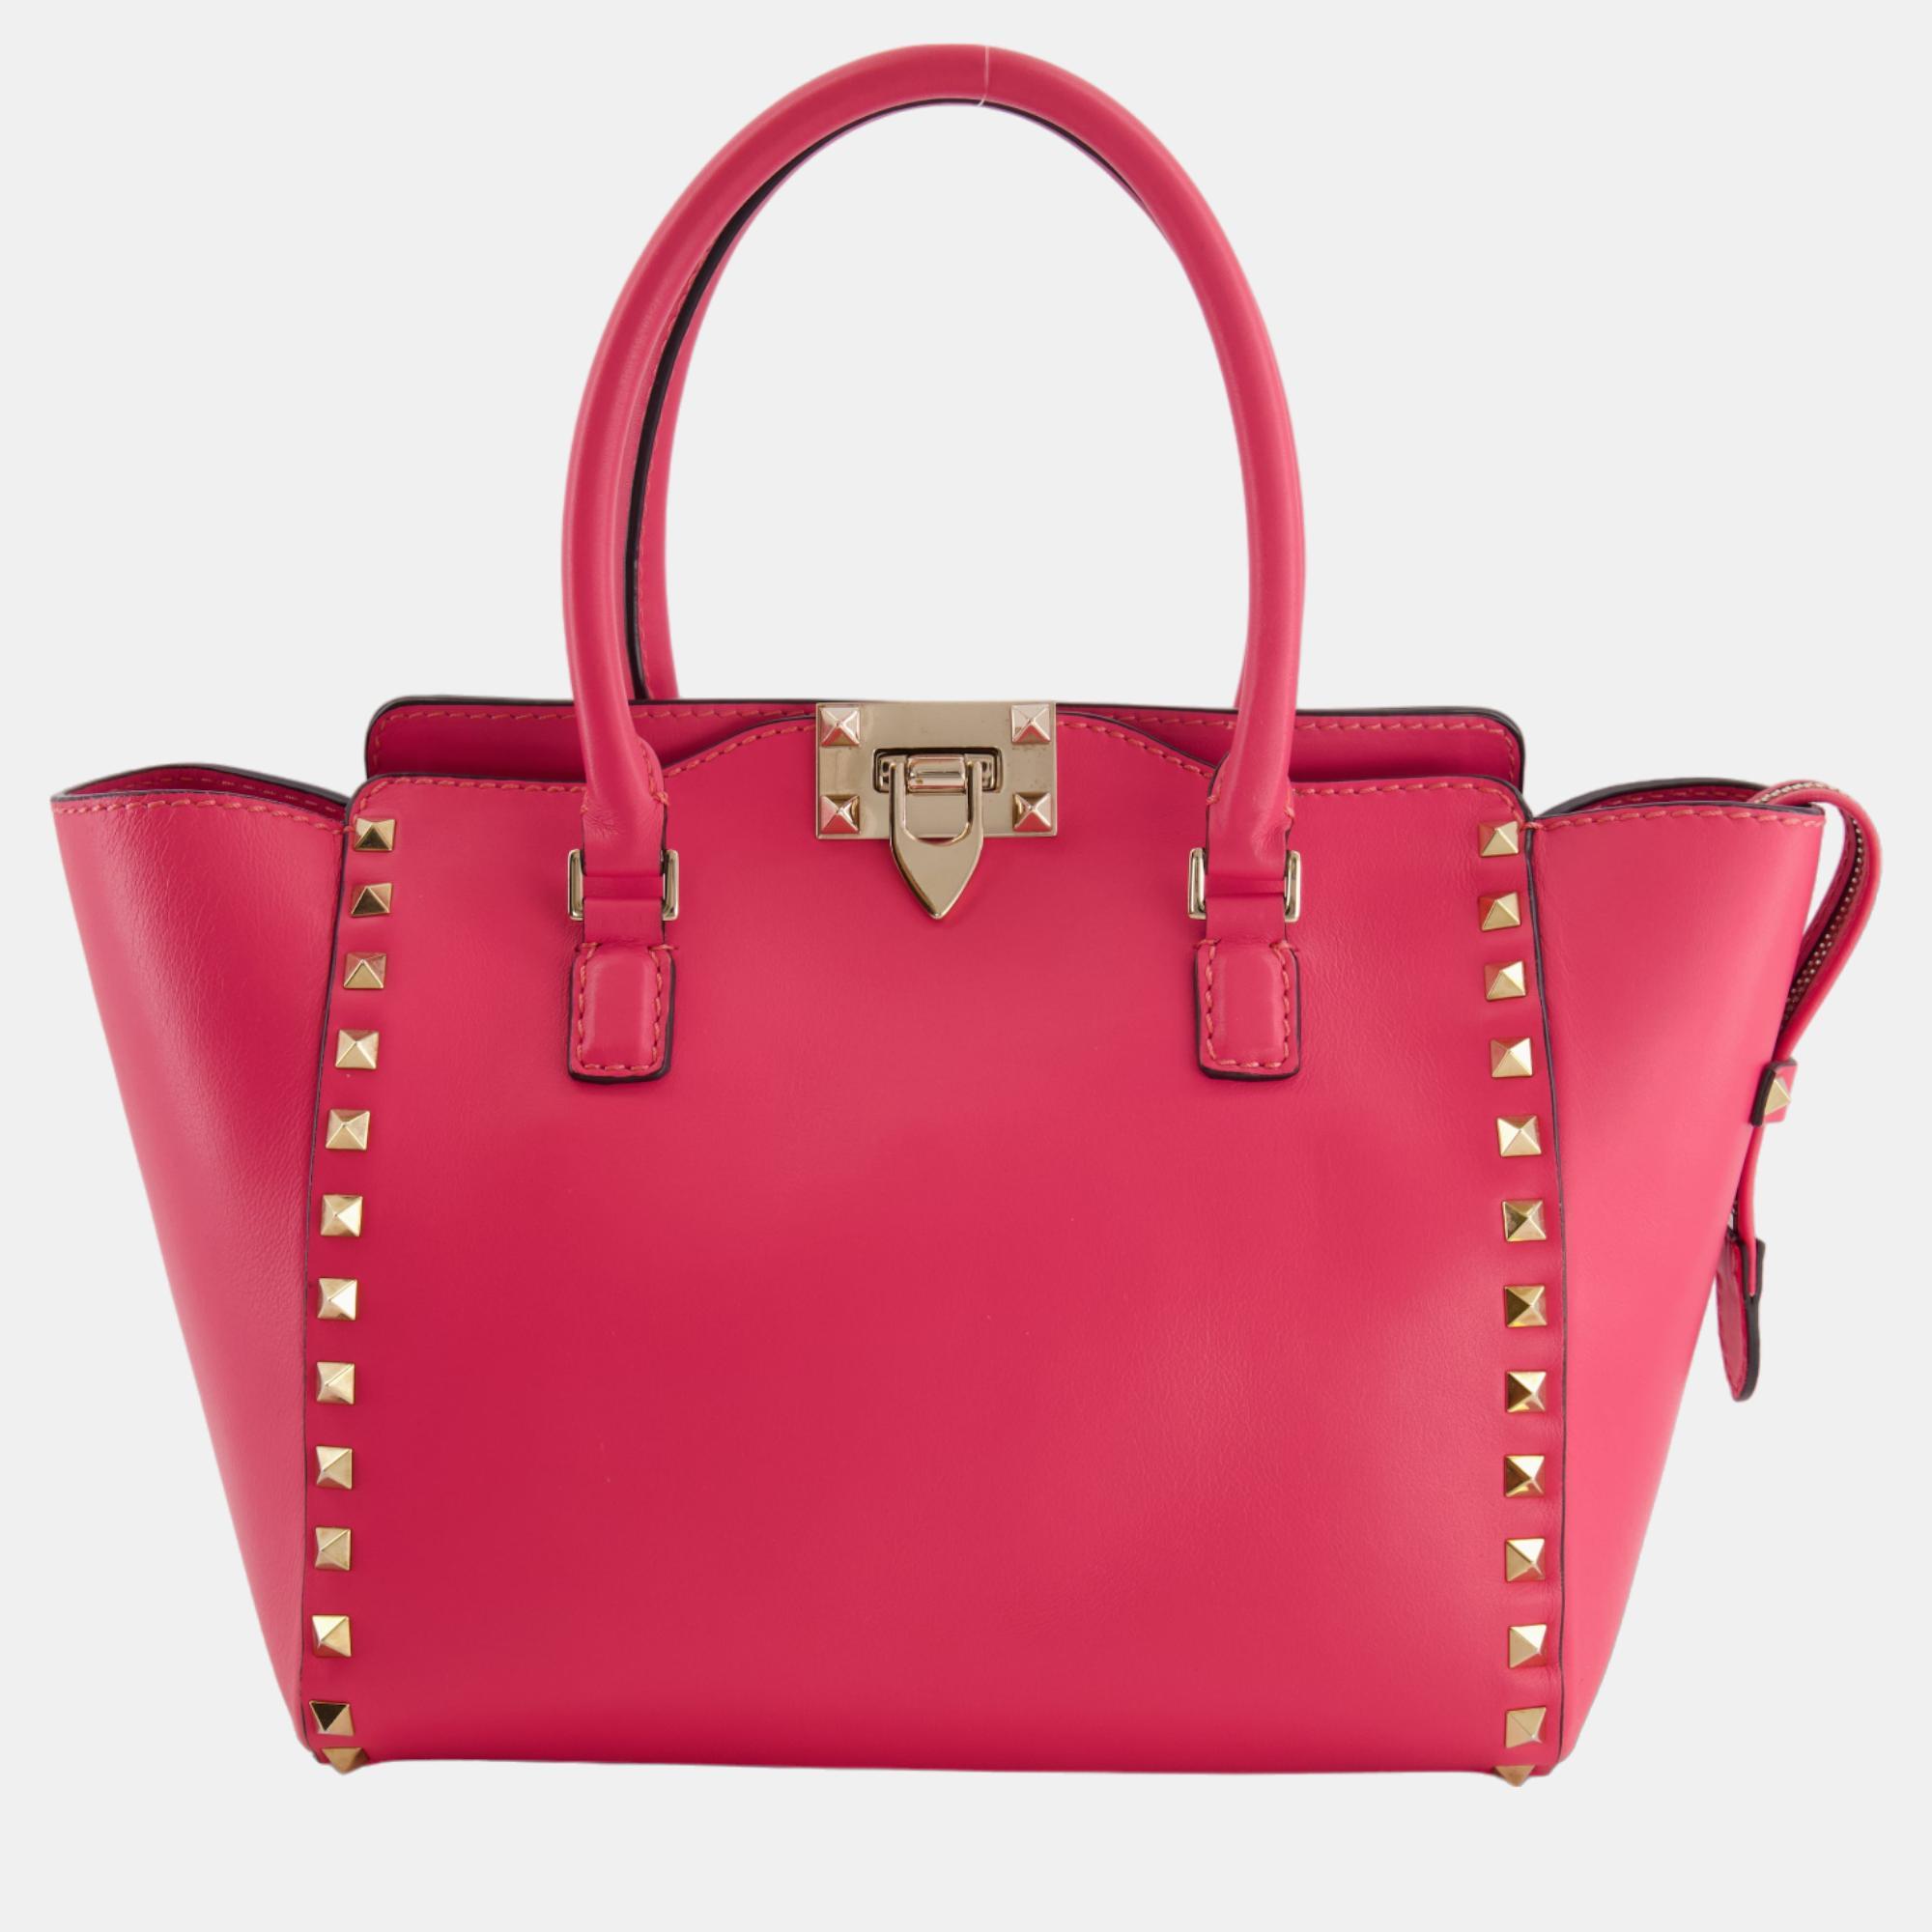 Valentino Hot Pink Rockstud Small Tote Bag With Champagne Gold Hardware